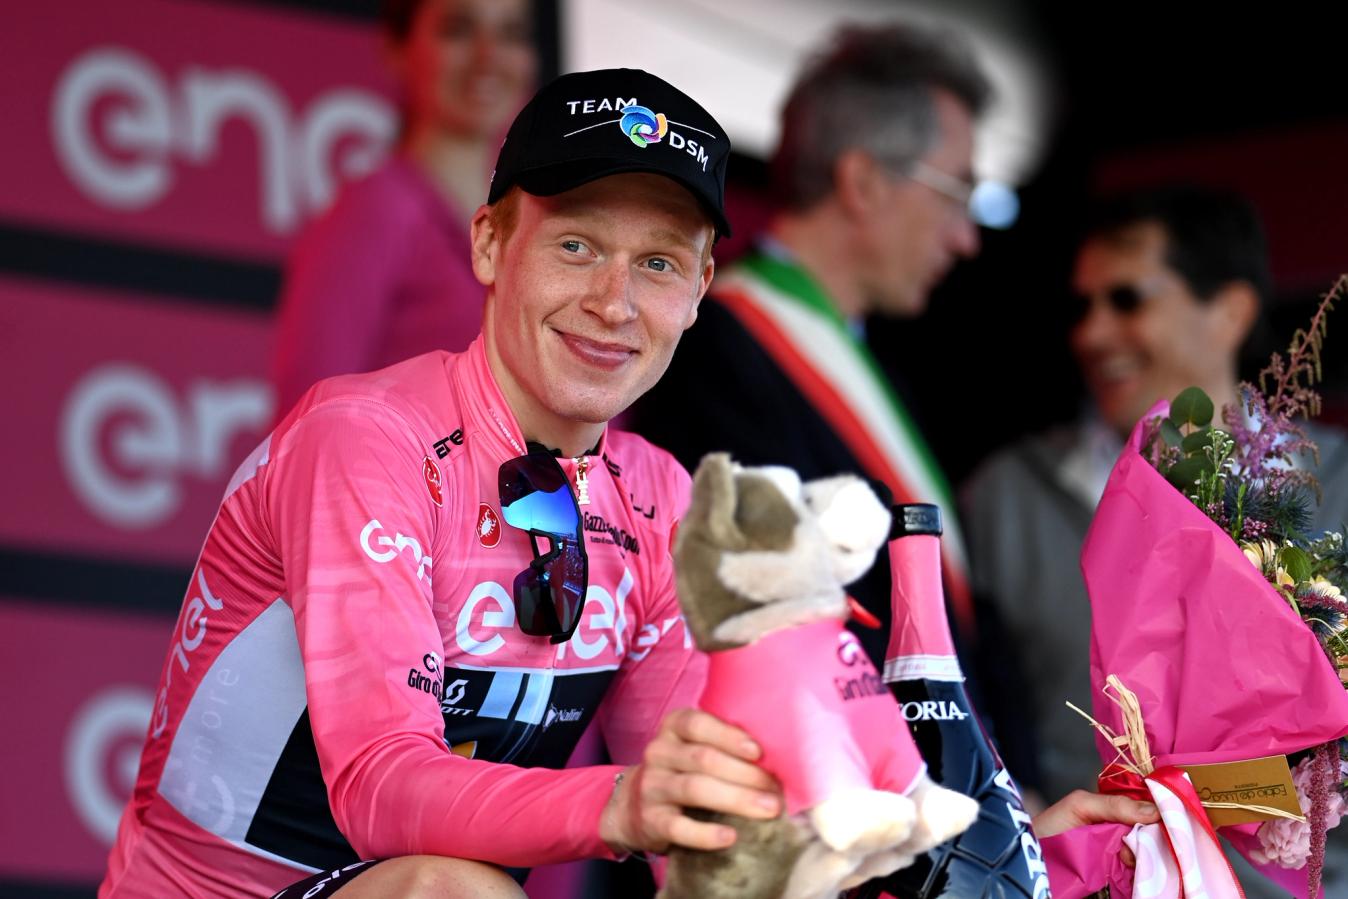 Having spent five days in the maglia rosa at this year's Giro, Andreas Leknessund battled well to finish eighth overall